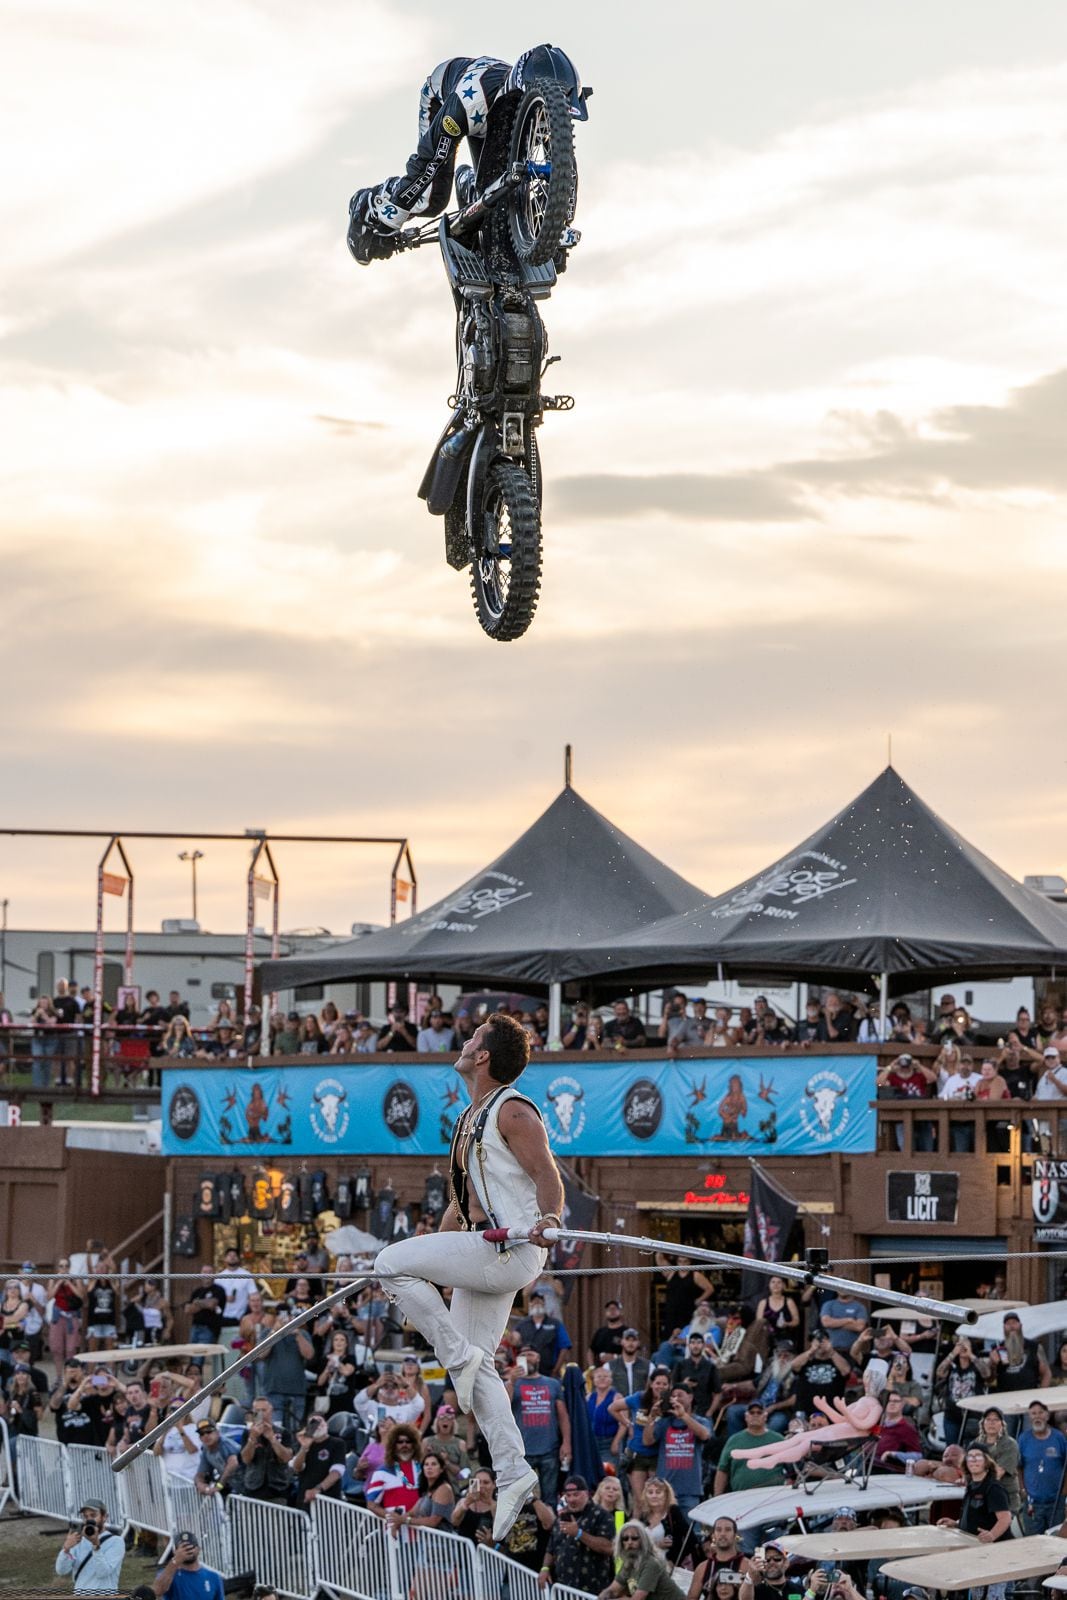 Famous, indeed. Kyle Ives, of Ives Brothers Wall of Death fame, jumped the 375-foot tightrope of Blake Wallenda, of Flying Wallenda’s fame at the Sturgis Motorcycle Rally, South Dakota.